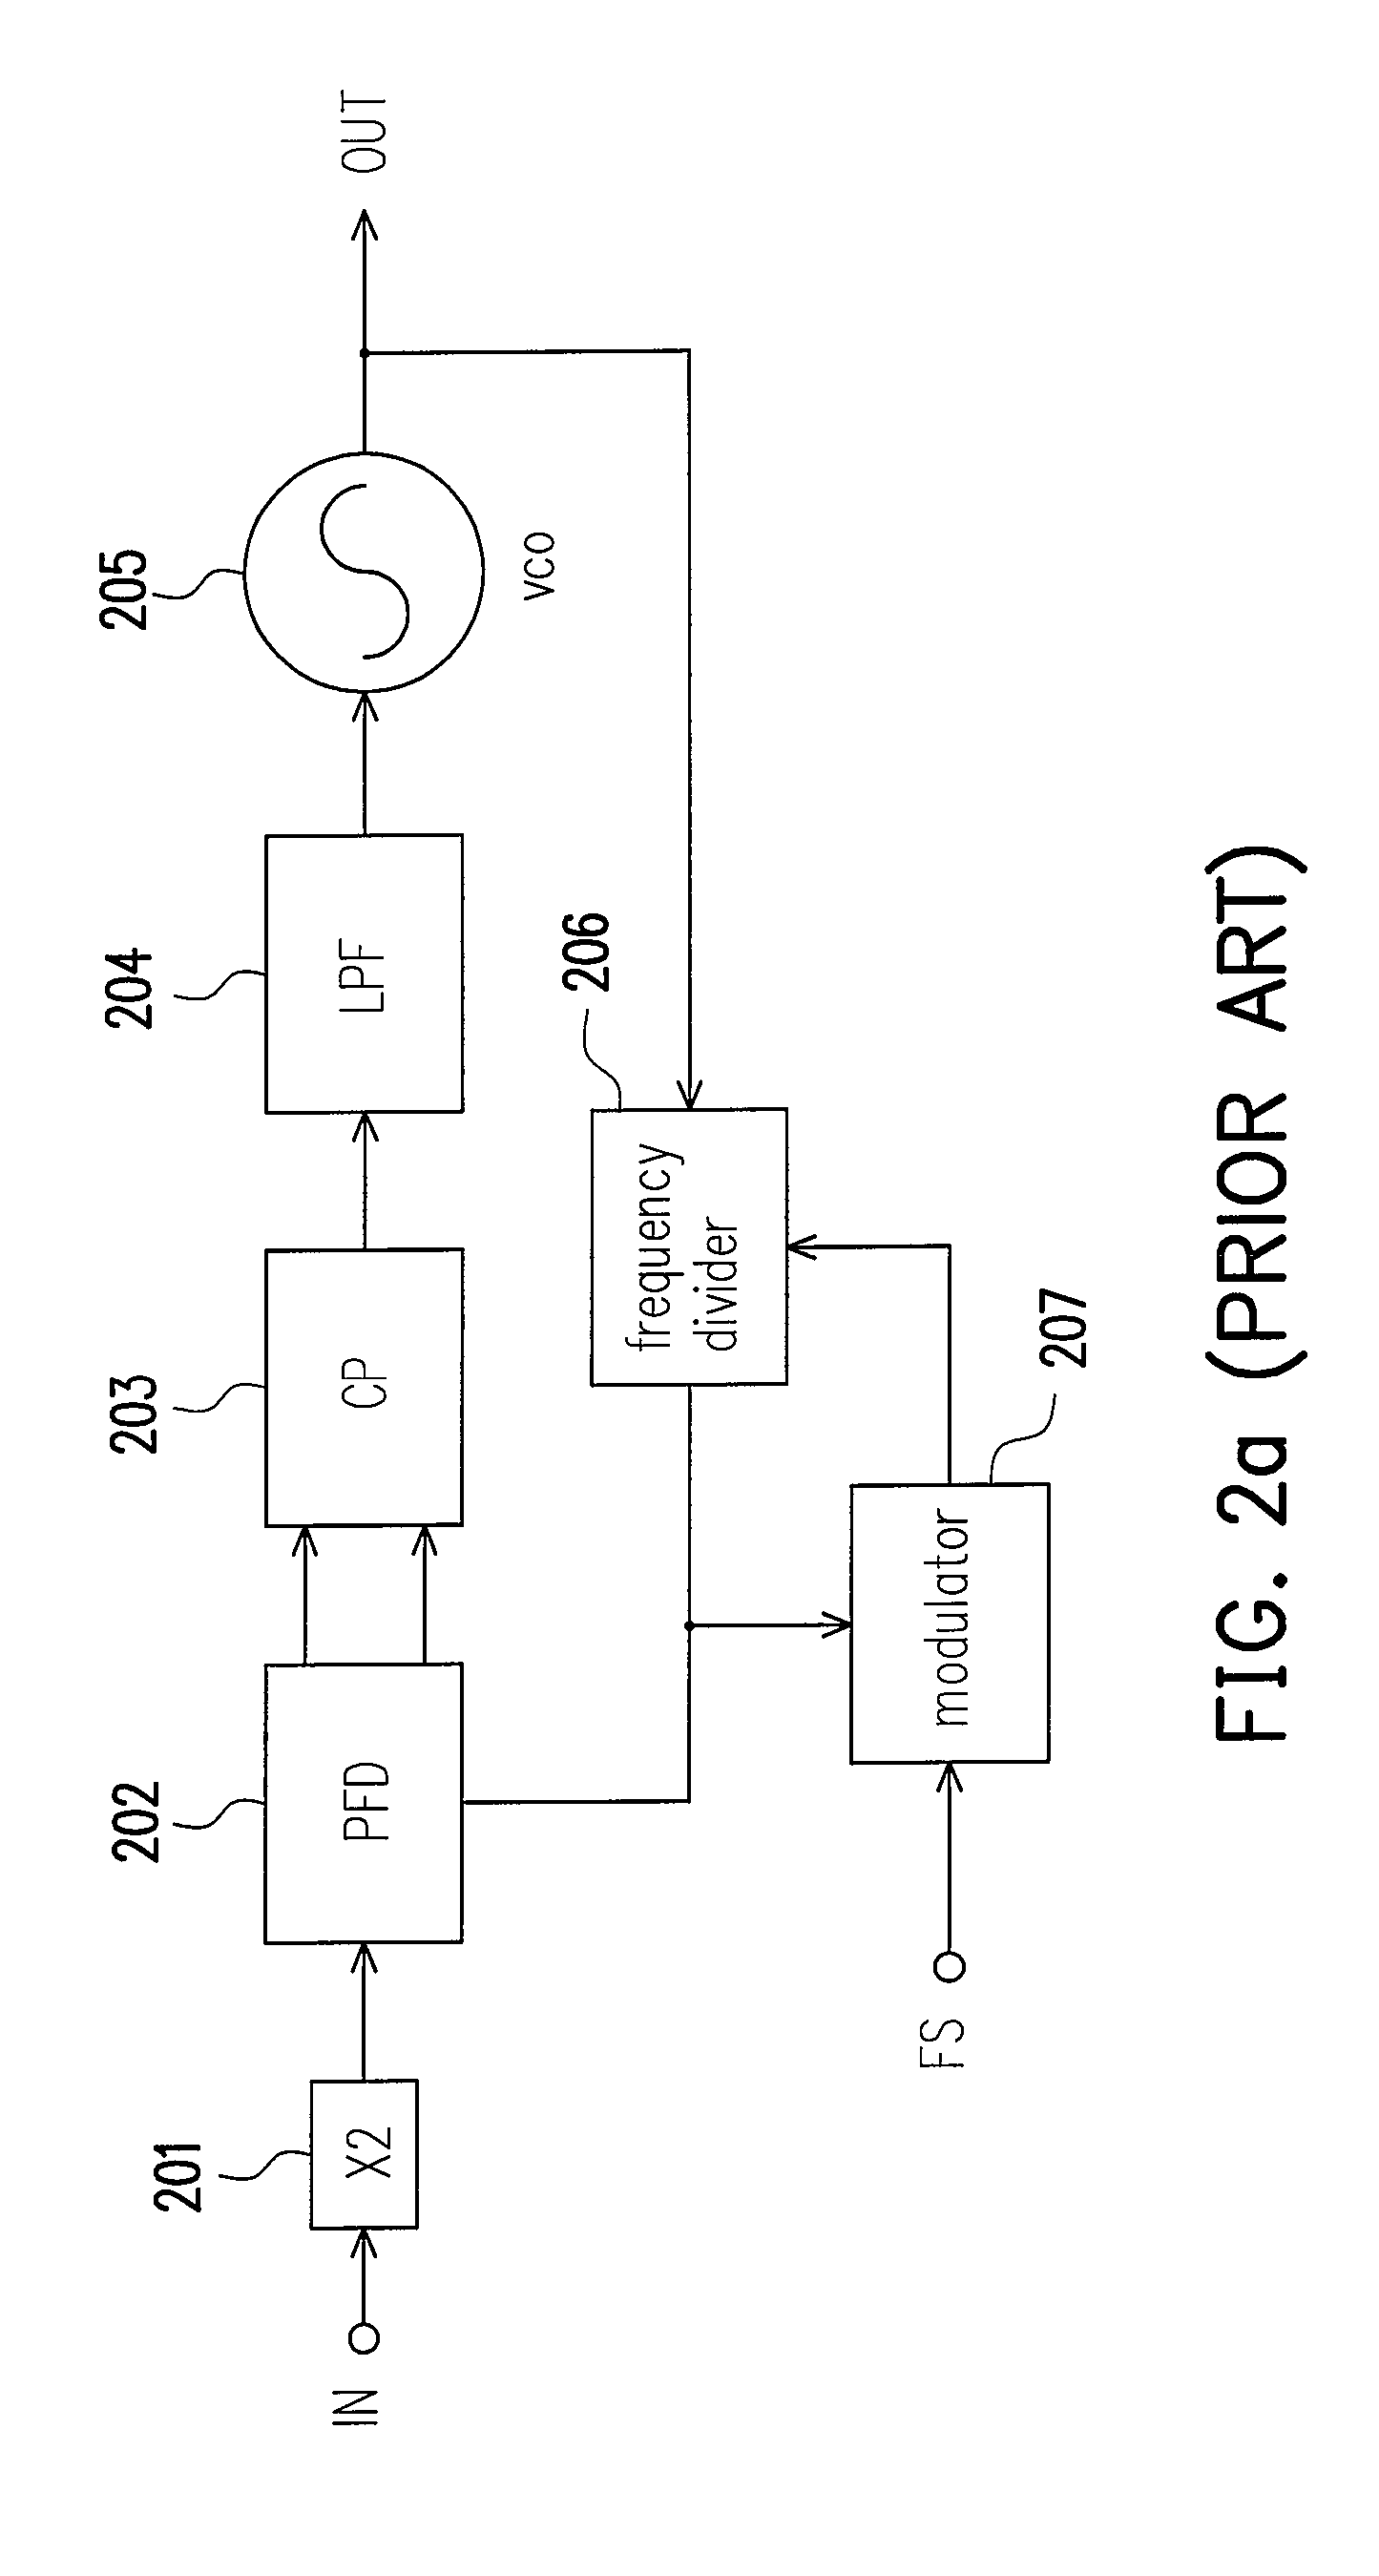 Phase locked loop with phase shifted input